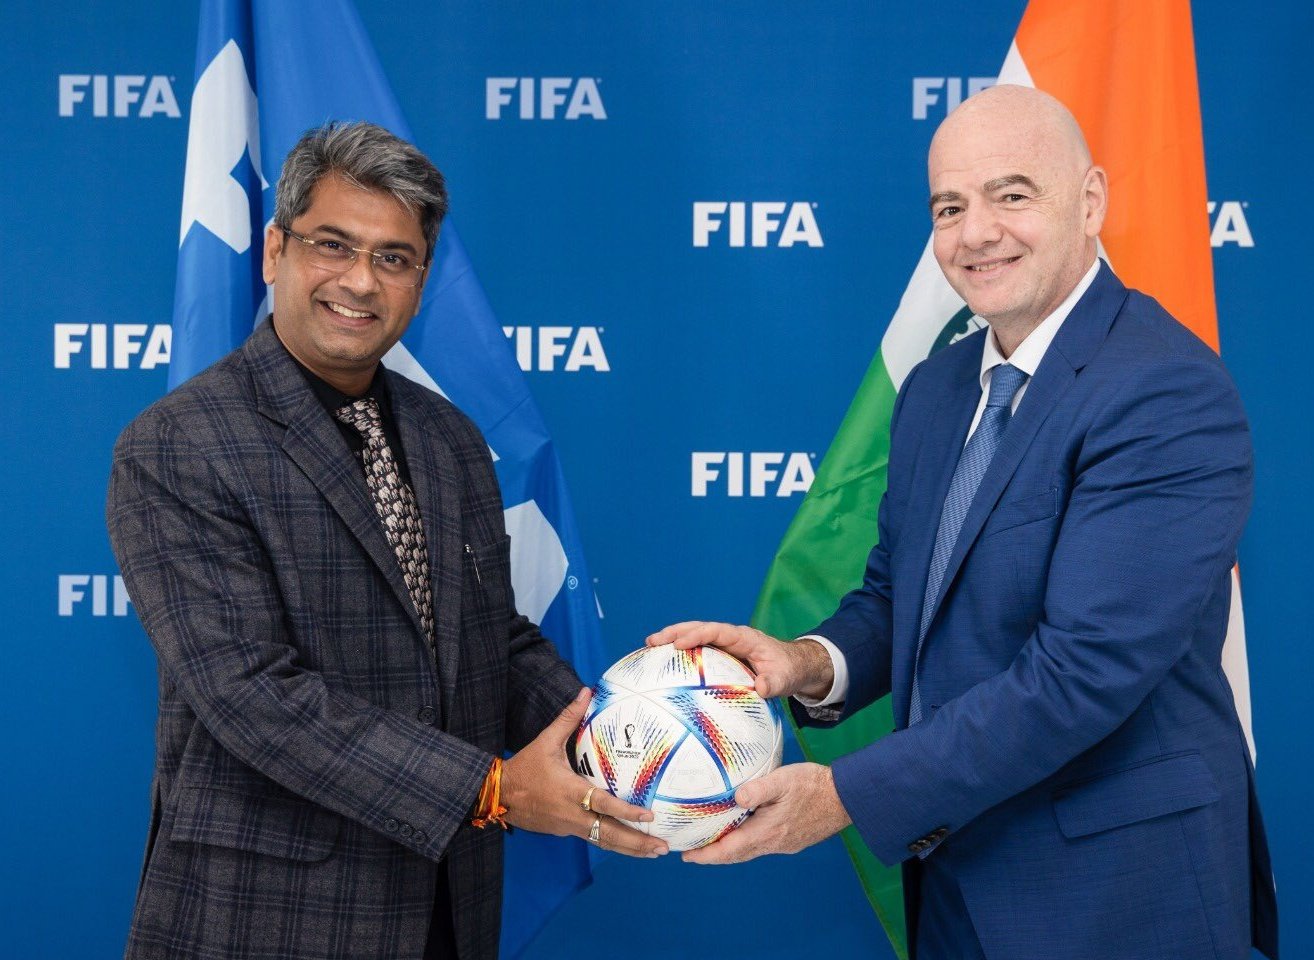 World Cup Hosts: AIFF President Kalyan Chaubey Eager to HOST World Cup in India, says 'Will discuss Possibility of India Hosting World Cup with FIFA President' - Check Out